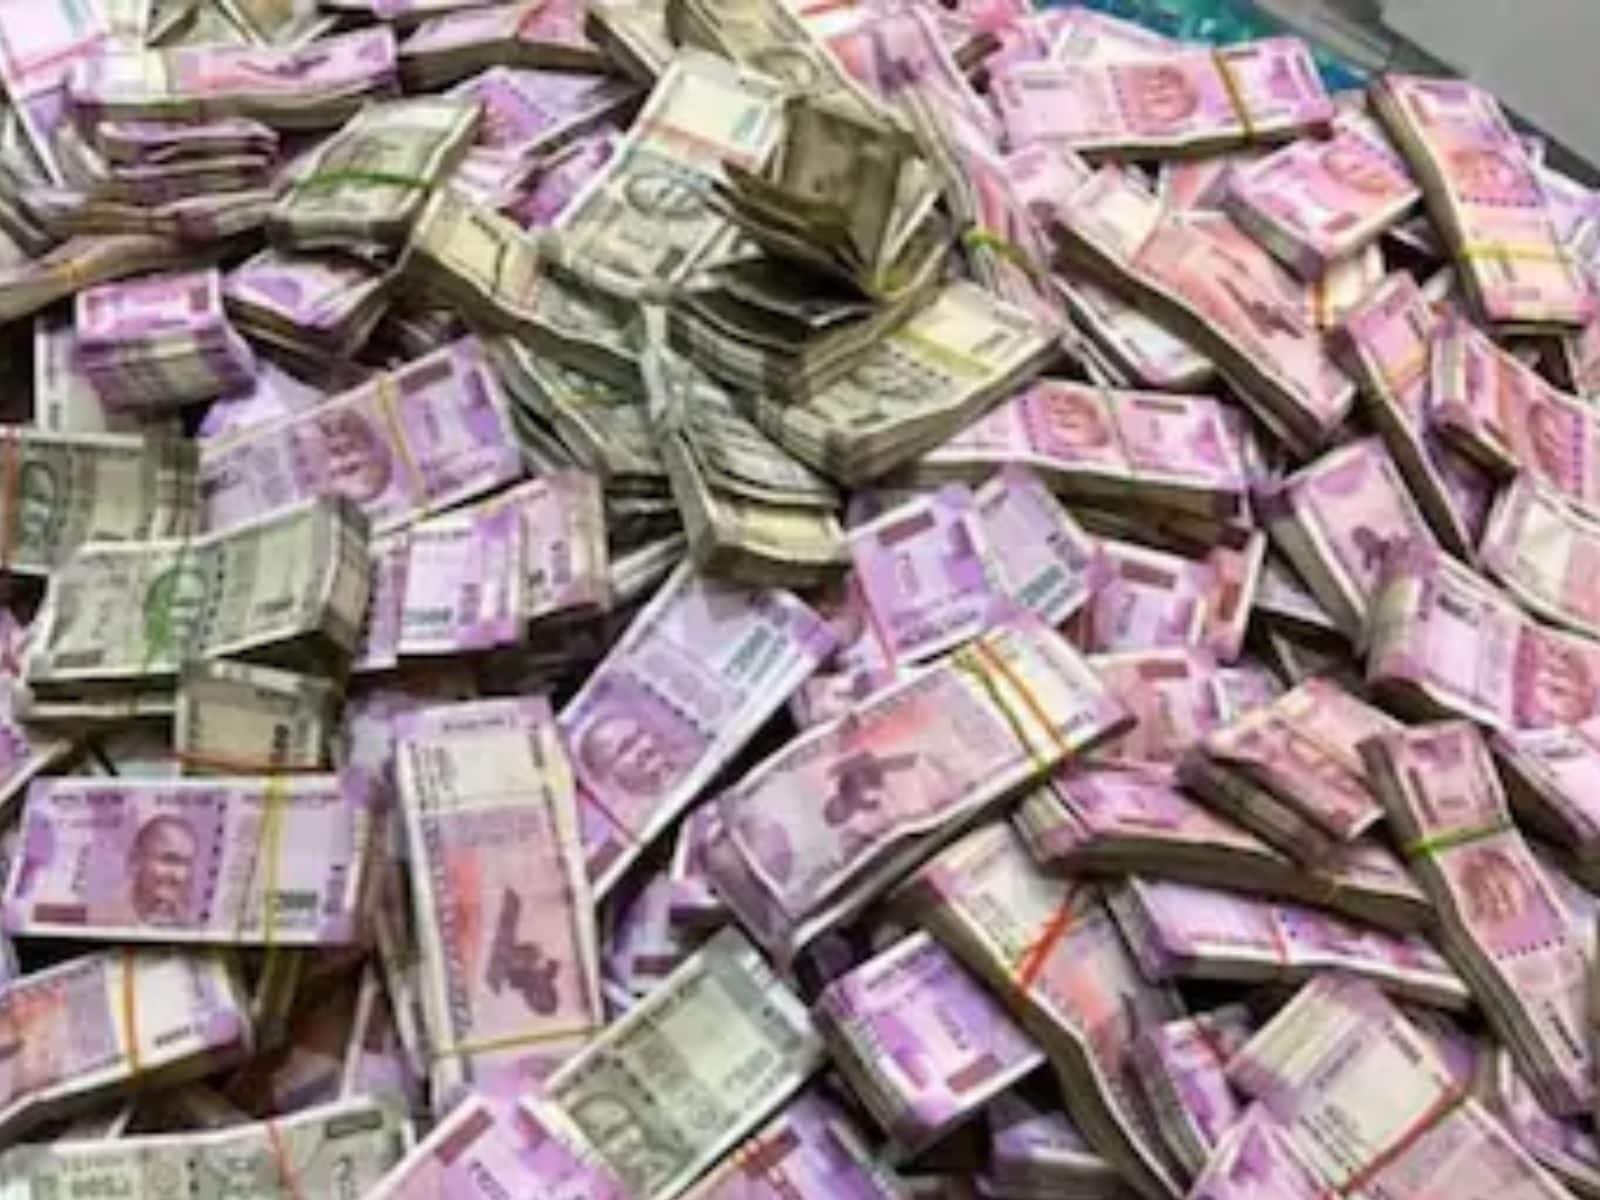 17 CR, 16 HOURS, 8 COUNTING MACHINES: ANOTHER CASH HAUL IN BENGAL